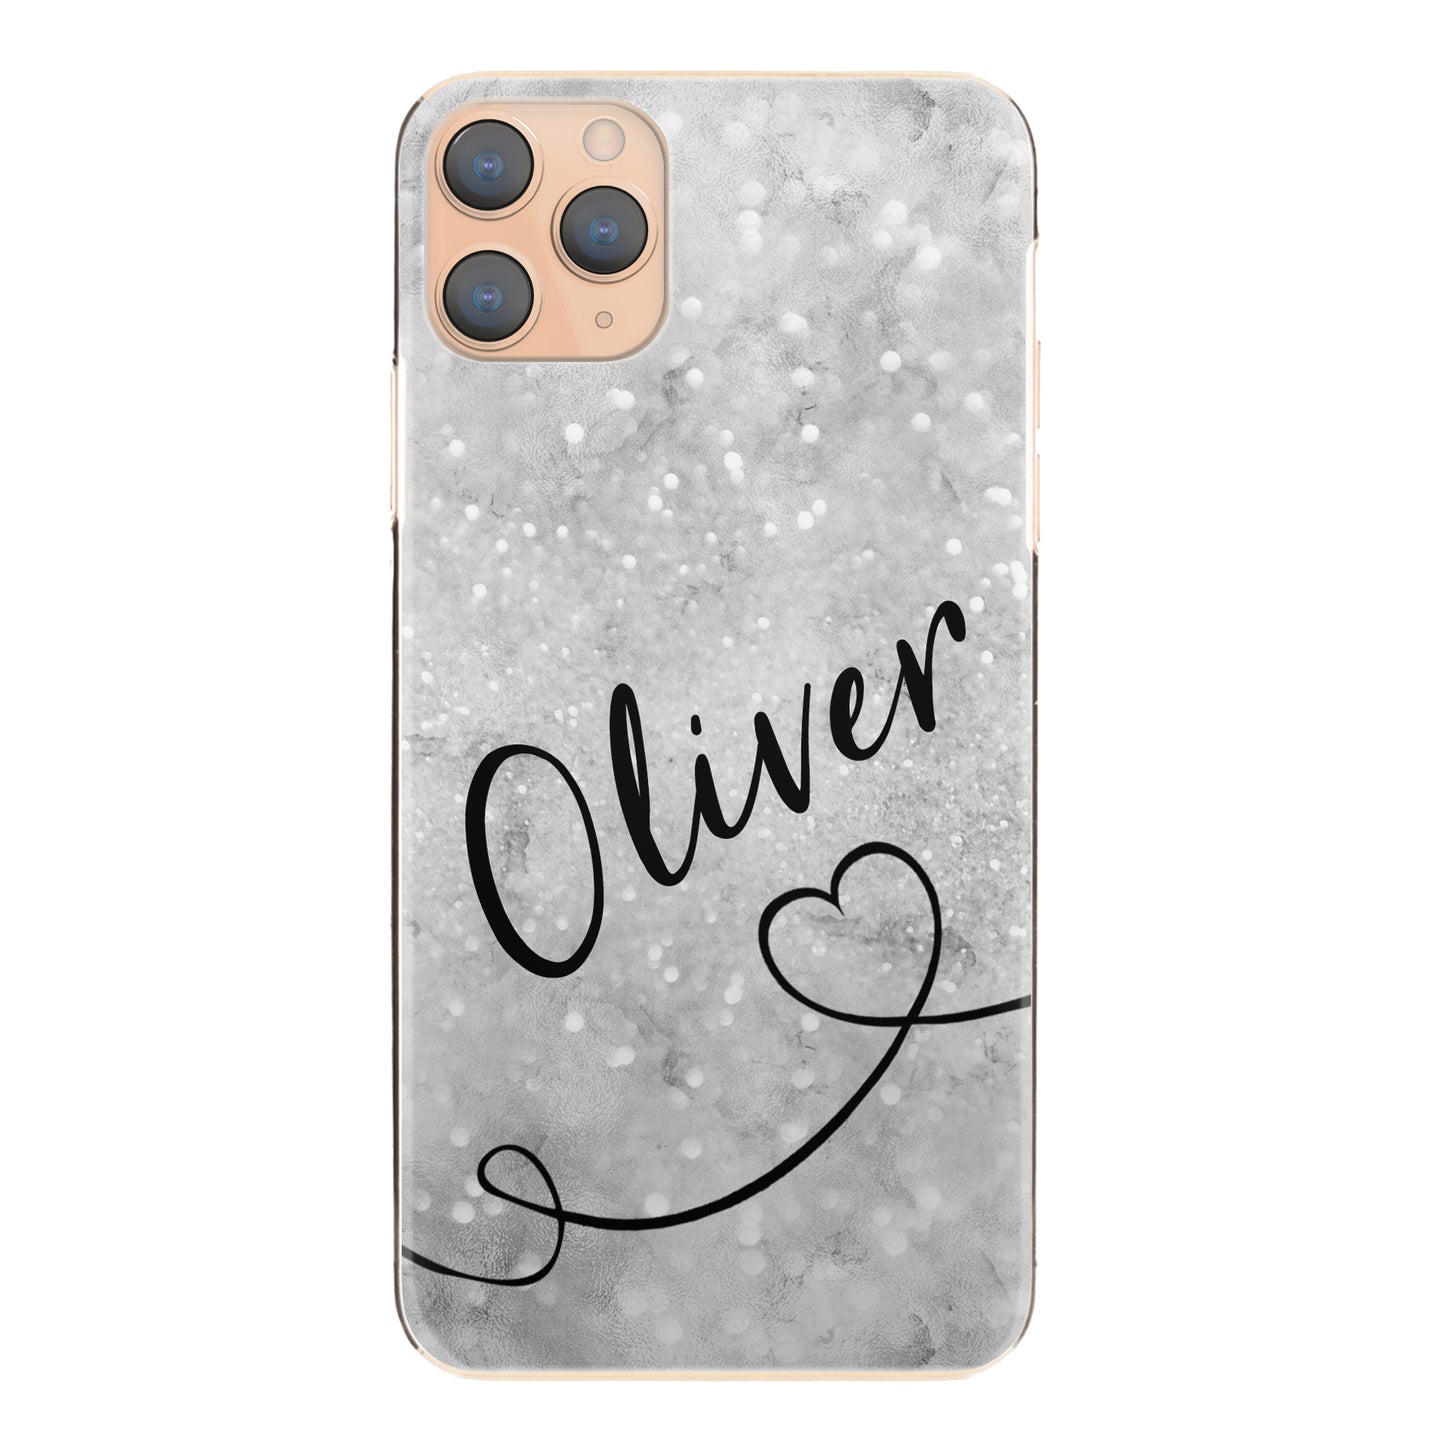 Personalised Google Phone Hard Case with Stylish Text and Heart Line on Textured Grey